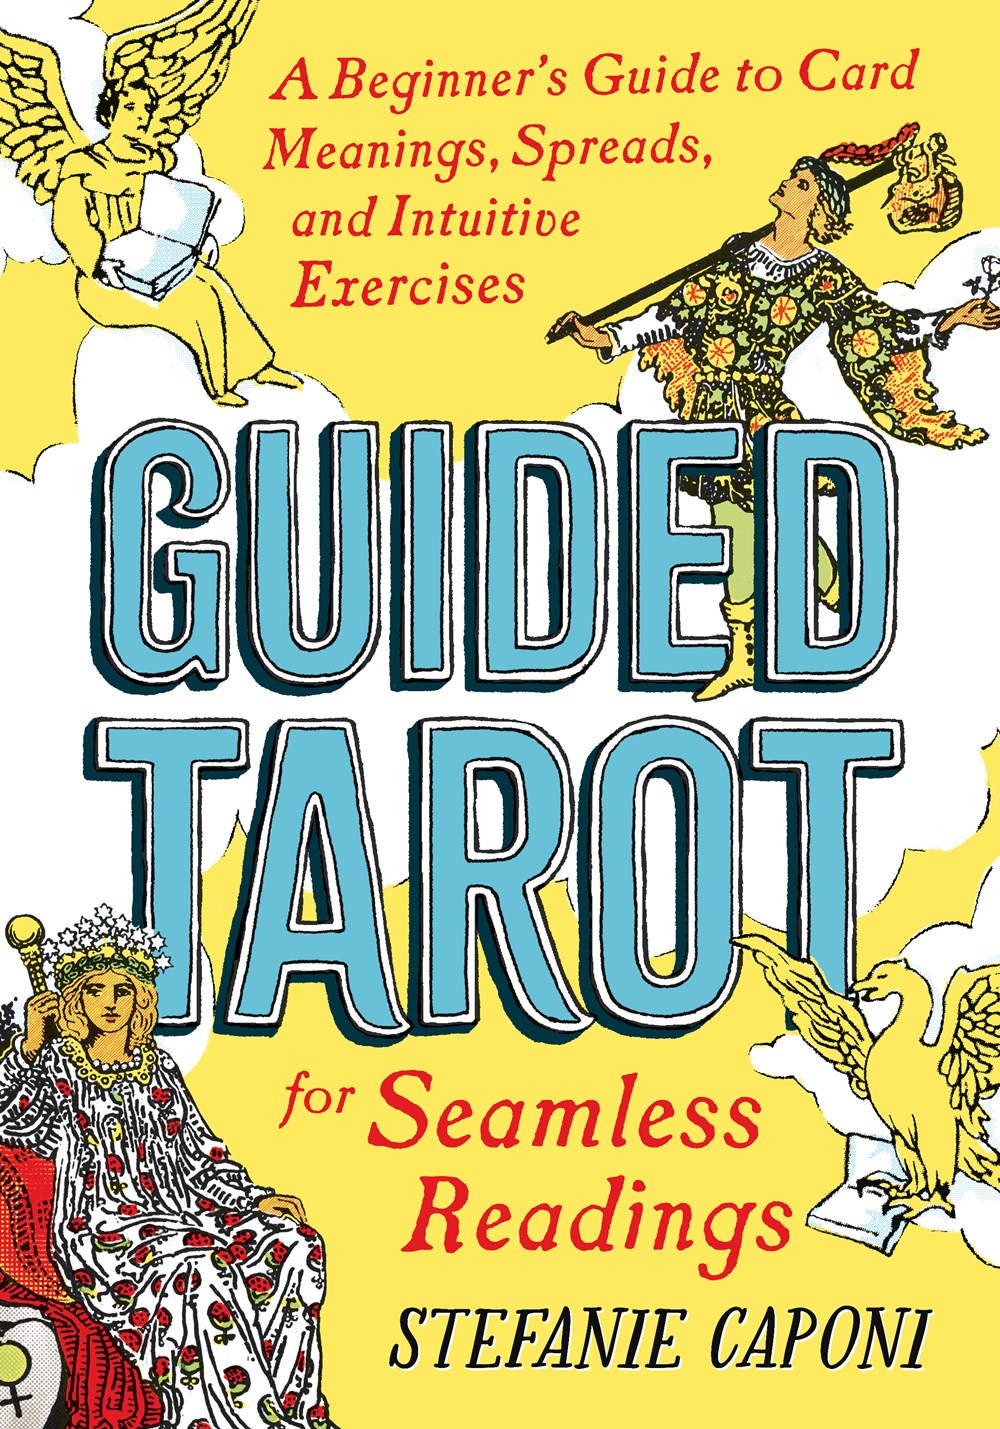 Guided Tarot : A Beginner's Guide to Card Meanings, Spreads, and Intuitive Exercises for Seamless Readings